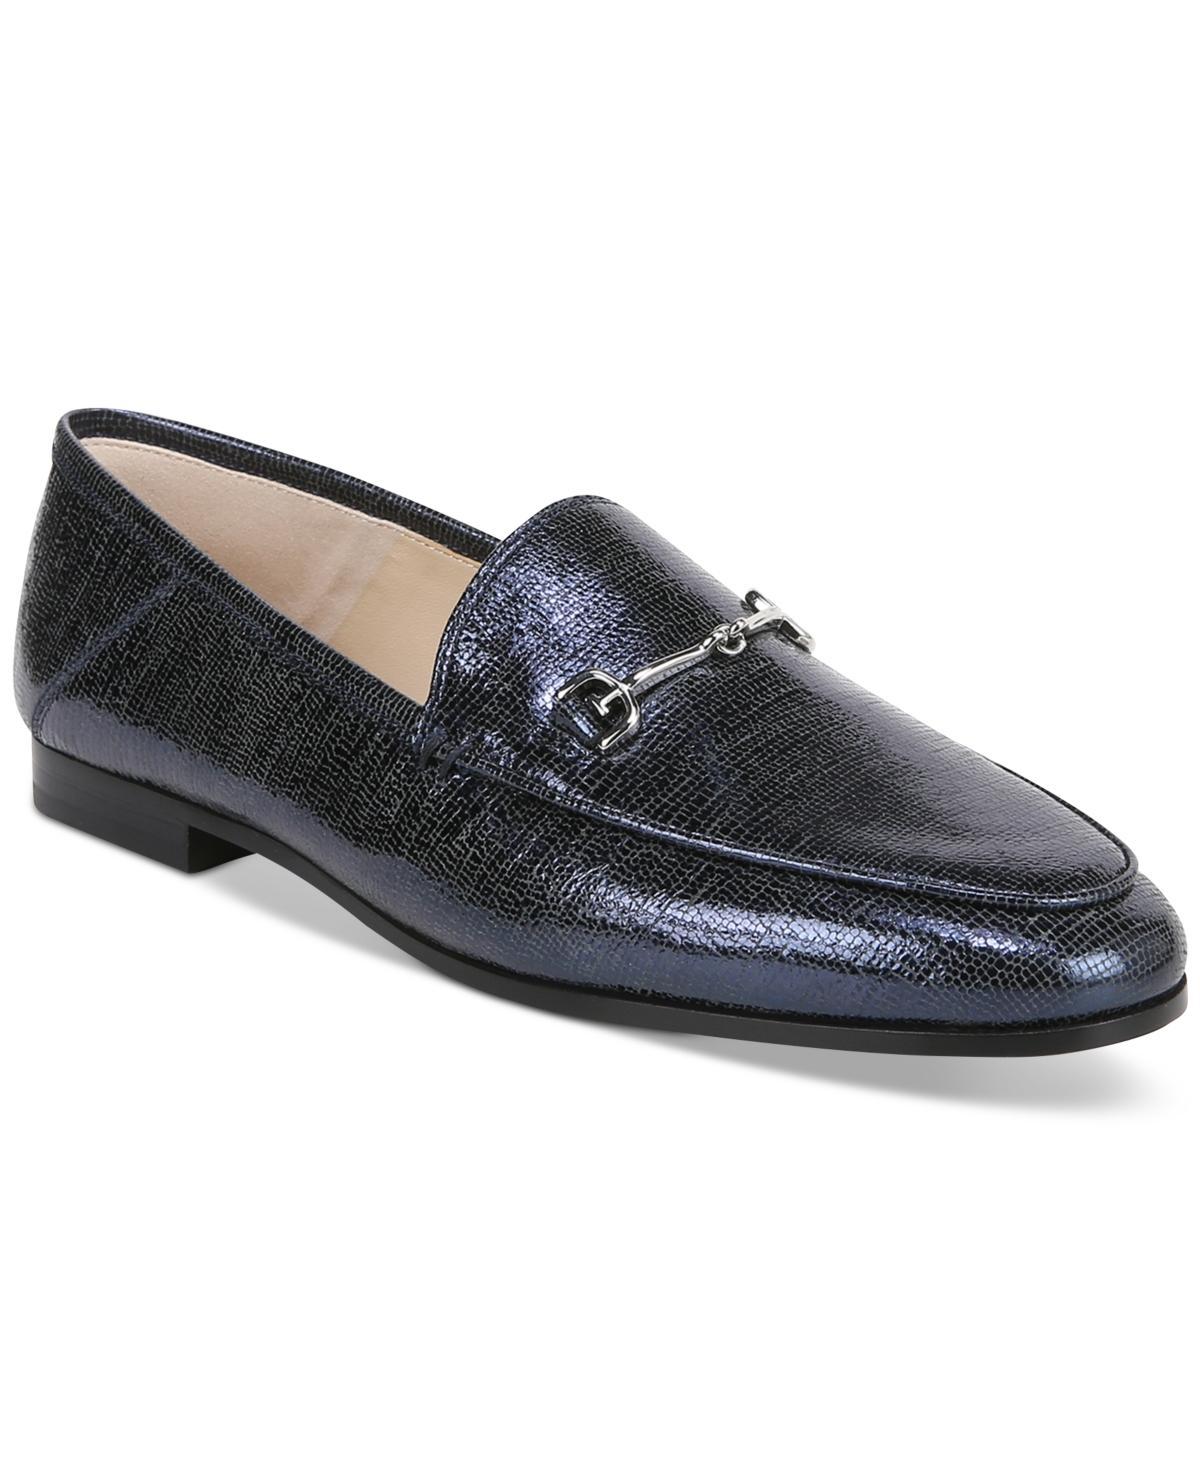 Sam Edelman Loraine Bit Loafer - Wide Width Available Product Image